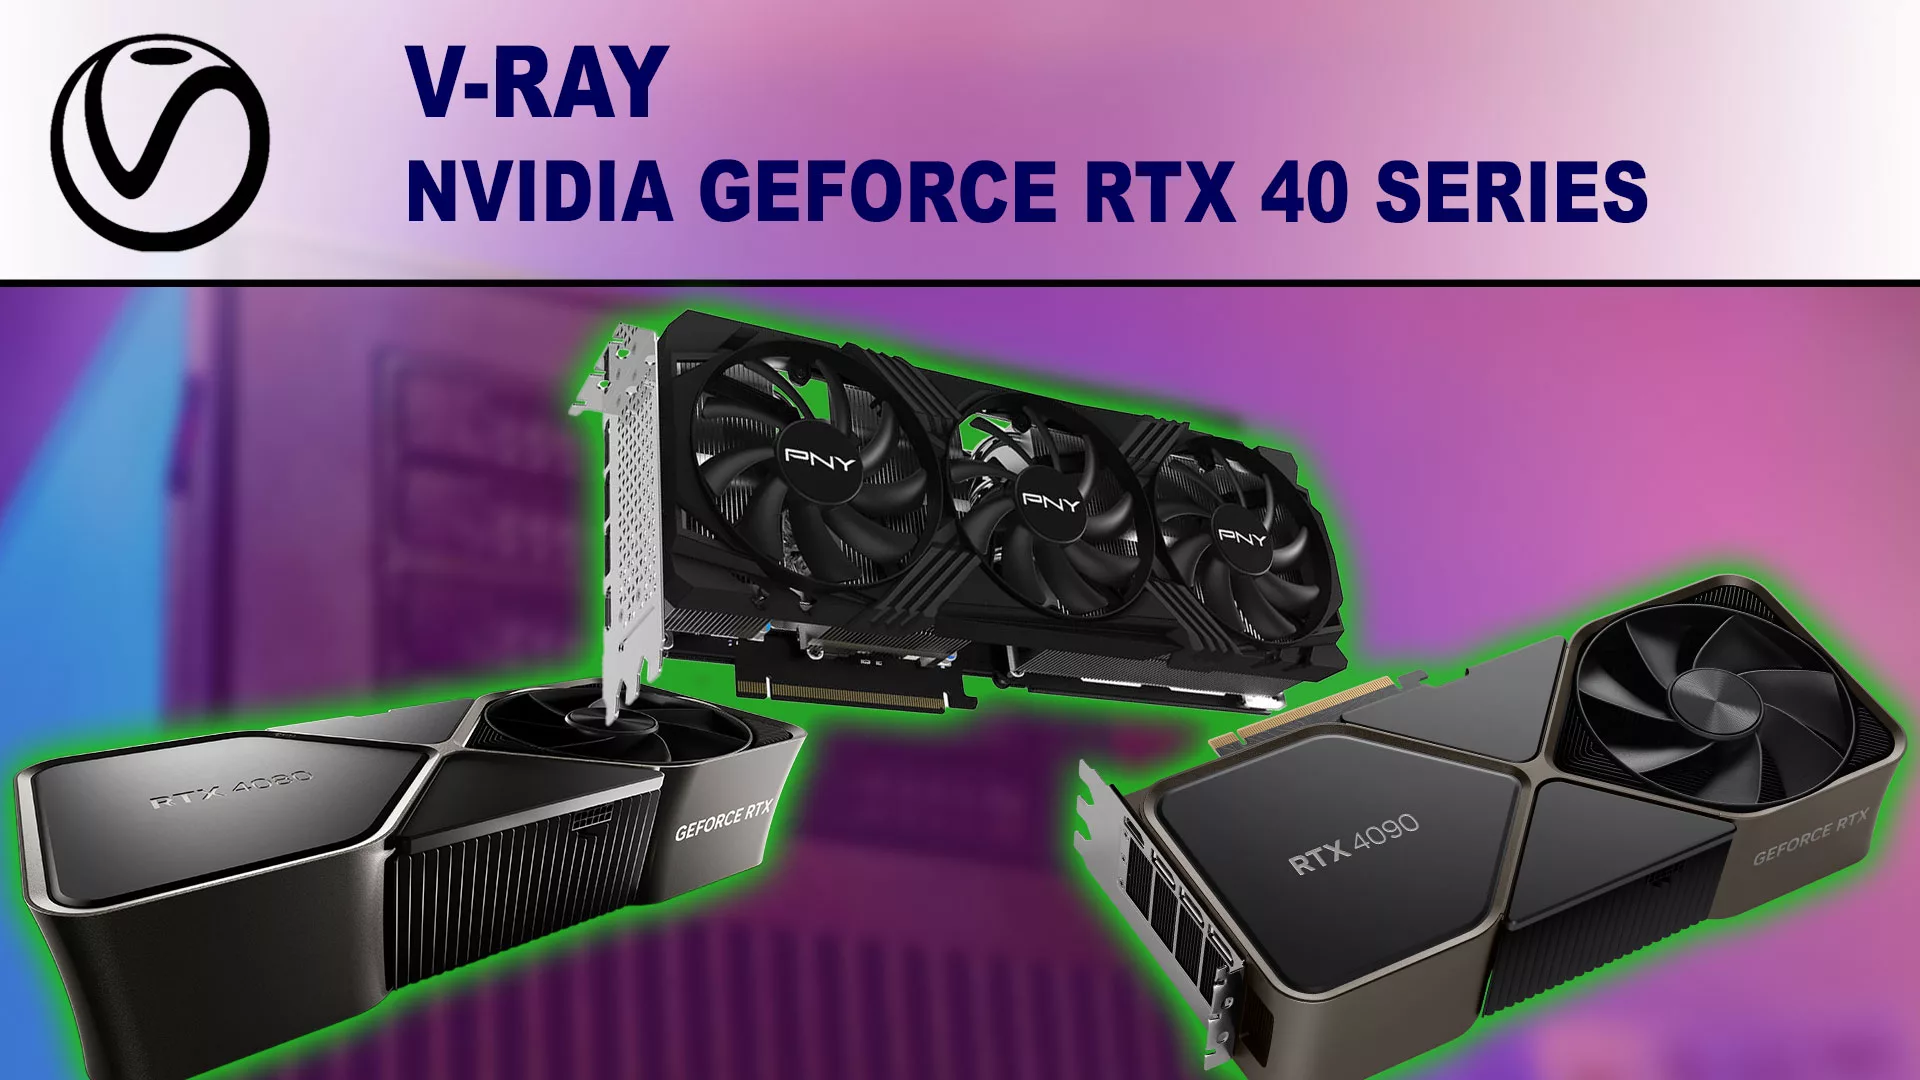 VRay NVIDIA GeForce RTX 40 Series Performance Puget Systems